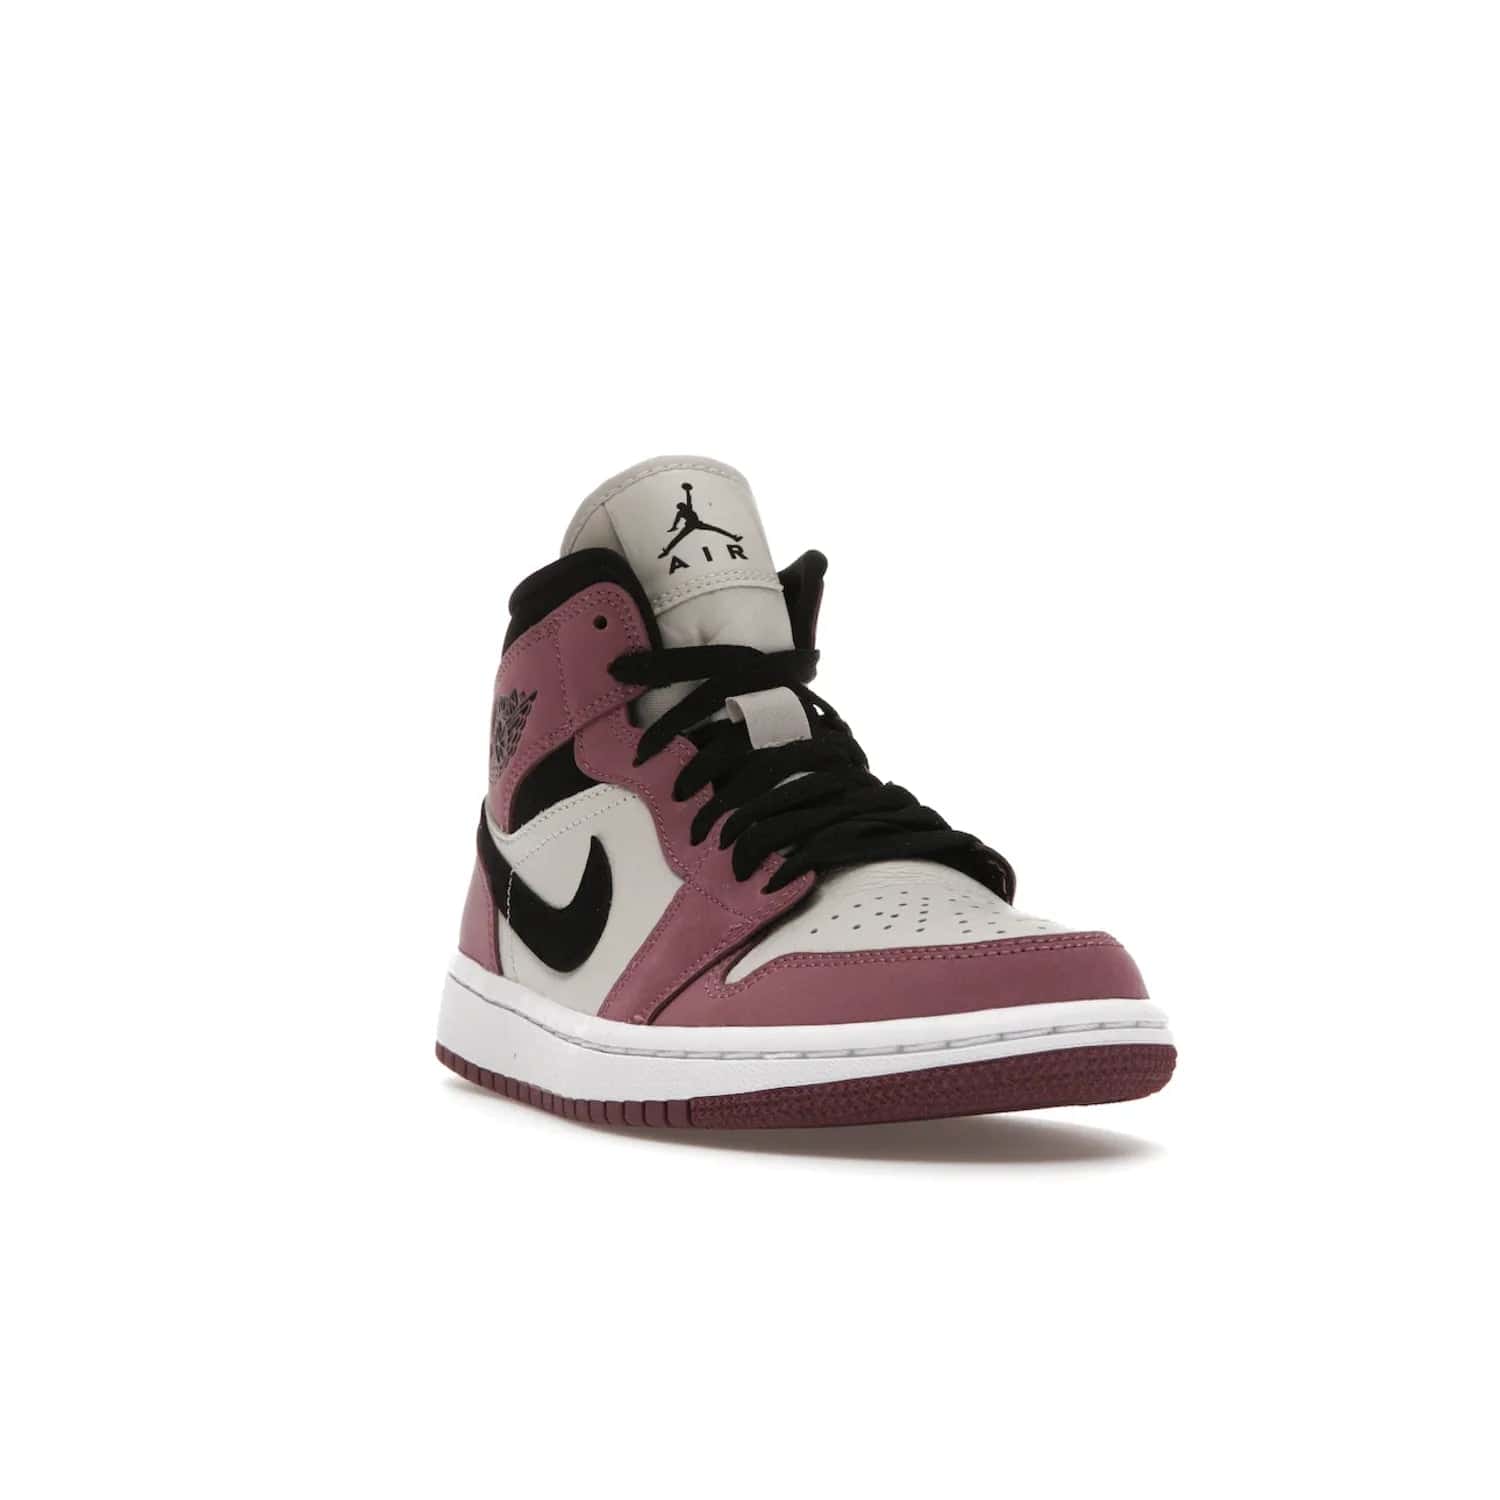 Jordan 1 Mid SE Light Mulberry (Women's) - Image 7 - Only at www.BallersClubKickz.com - Classic style meets performance with the Air Jordan 1 Mid Light Mulberry (Women's). Sleek leather overlays and light bone detailing bring out the best of this classic sneaker, perfect for the active woman on-the-go. Available March 2022.